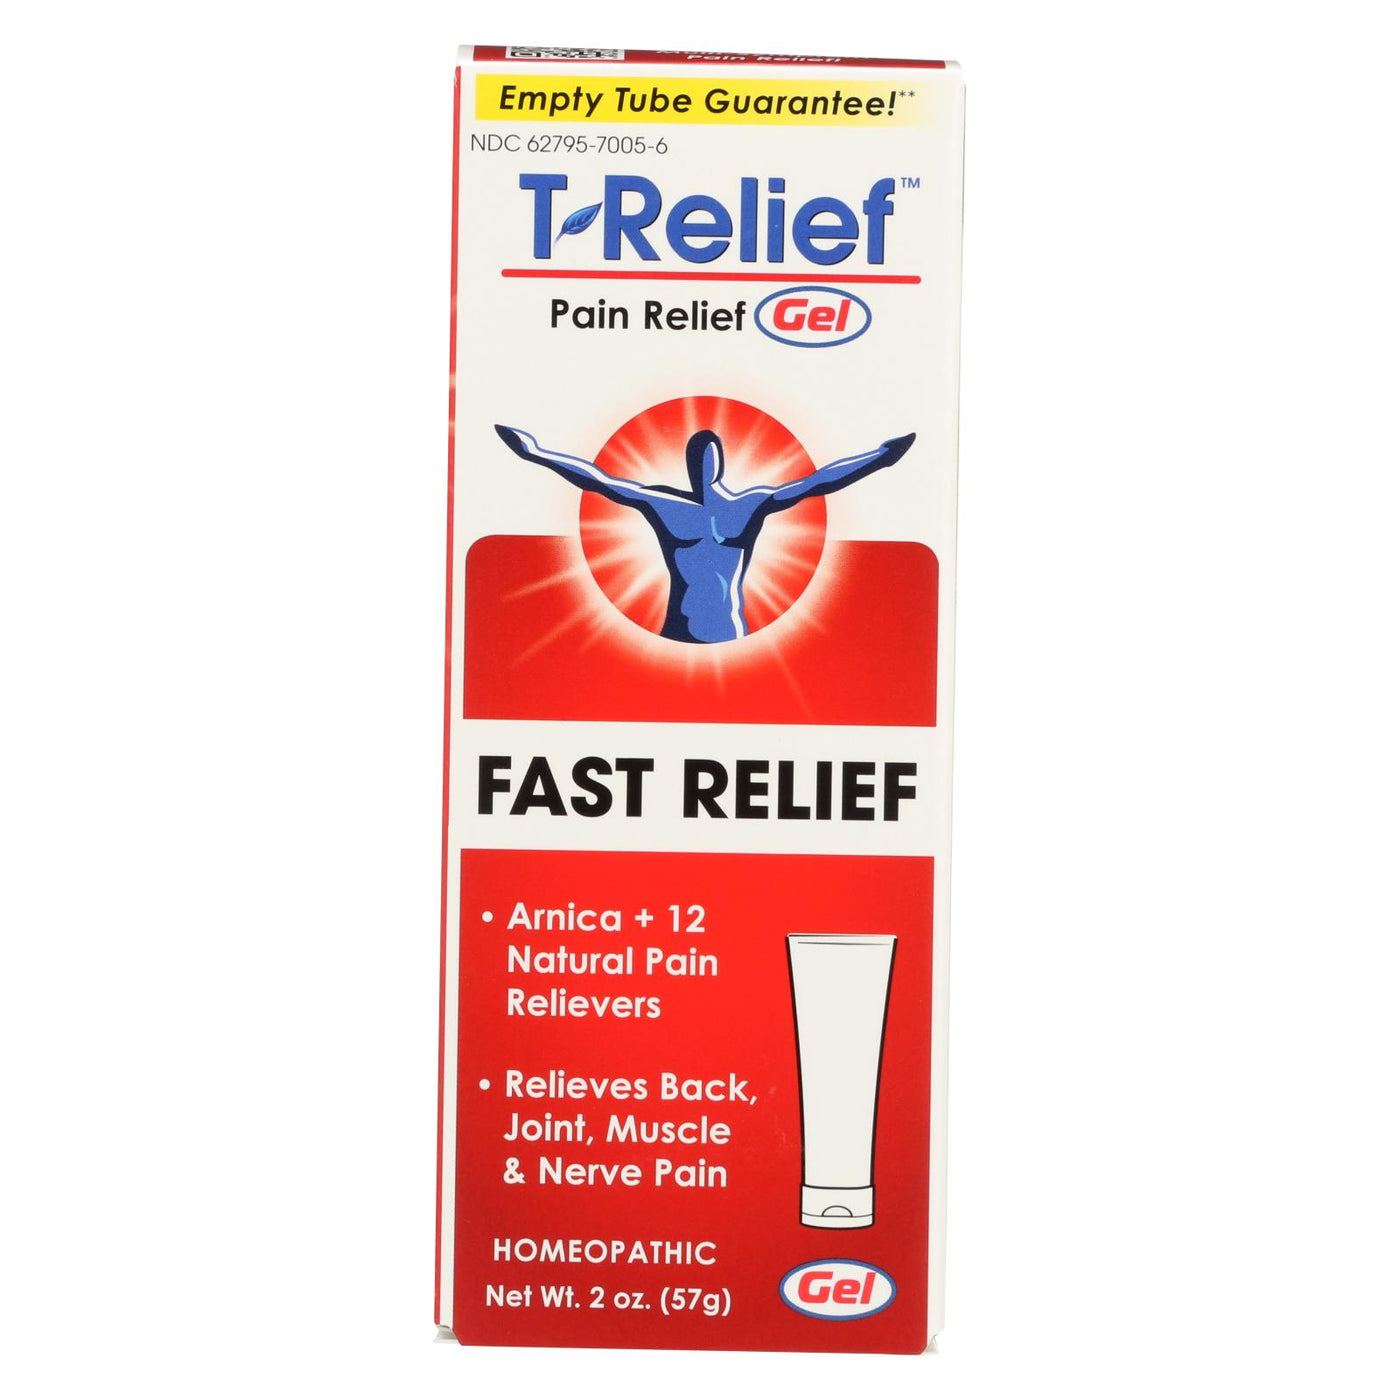 T-relief - Pain Relief Gel - Arnica Plus 12 Natural Ingredients - 1.76 Oz | OnlyNaturals.us